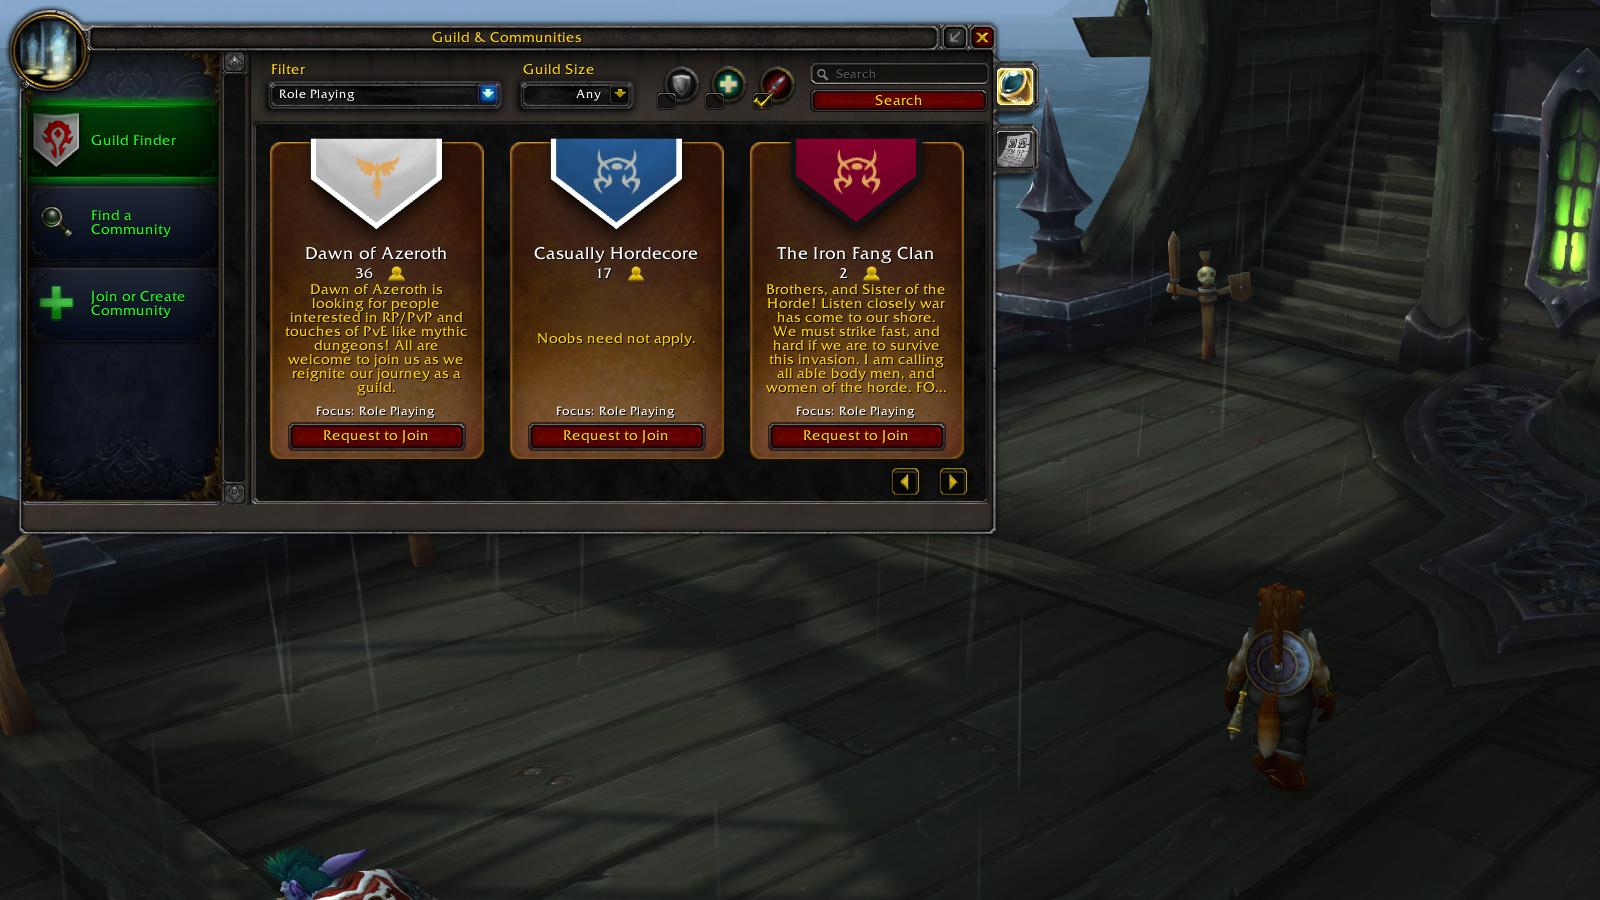 Image showing the Guild Finder tab in WoW